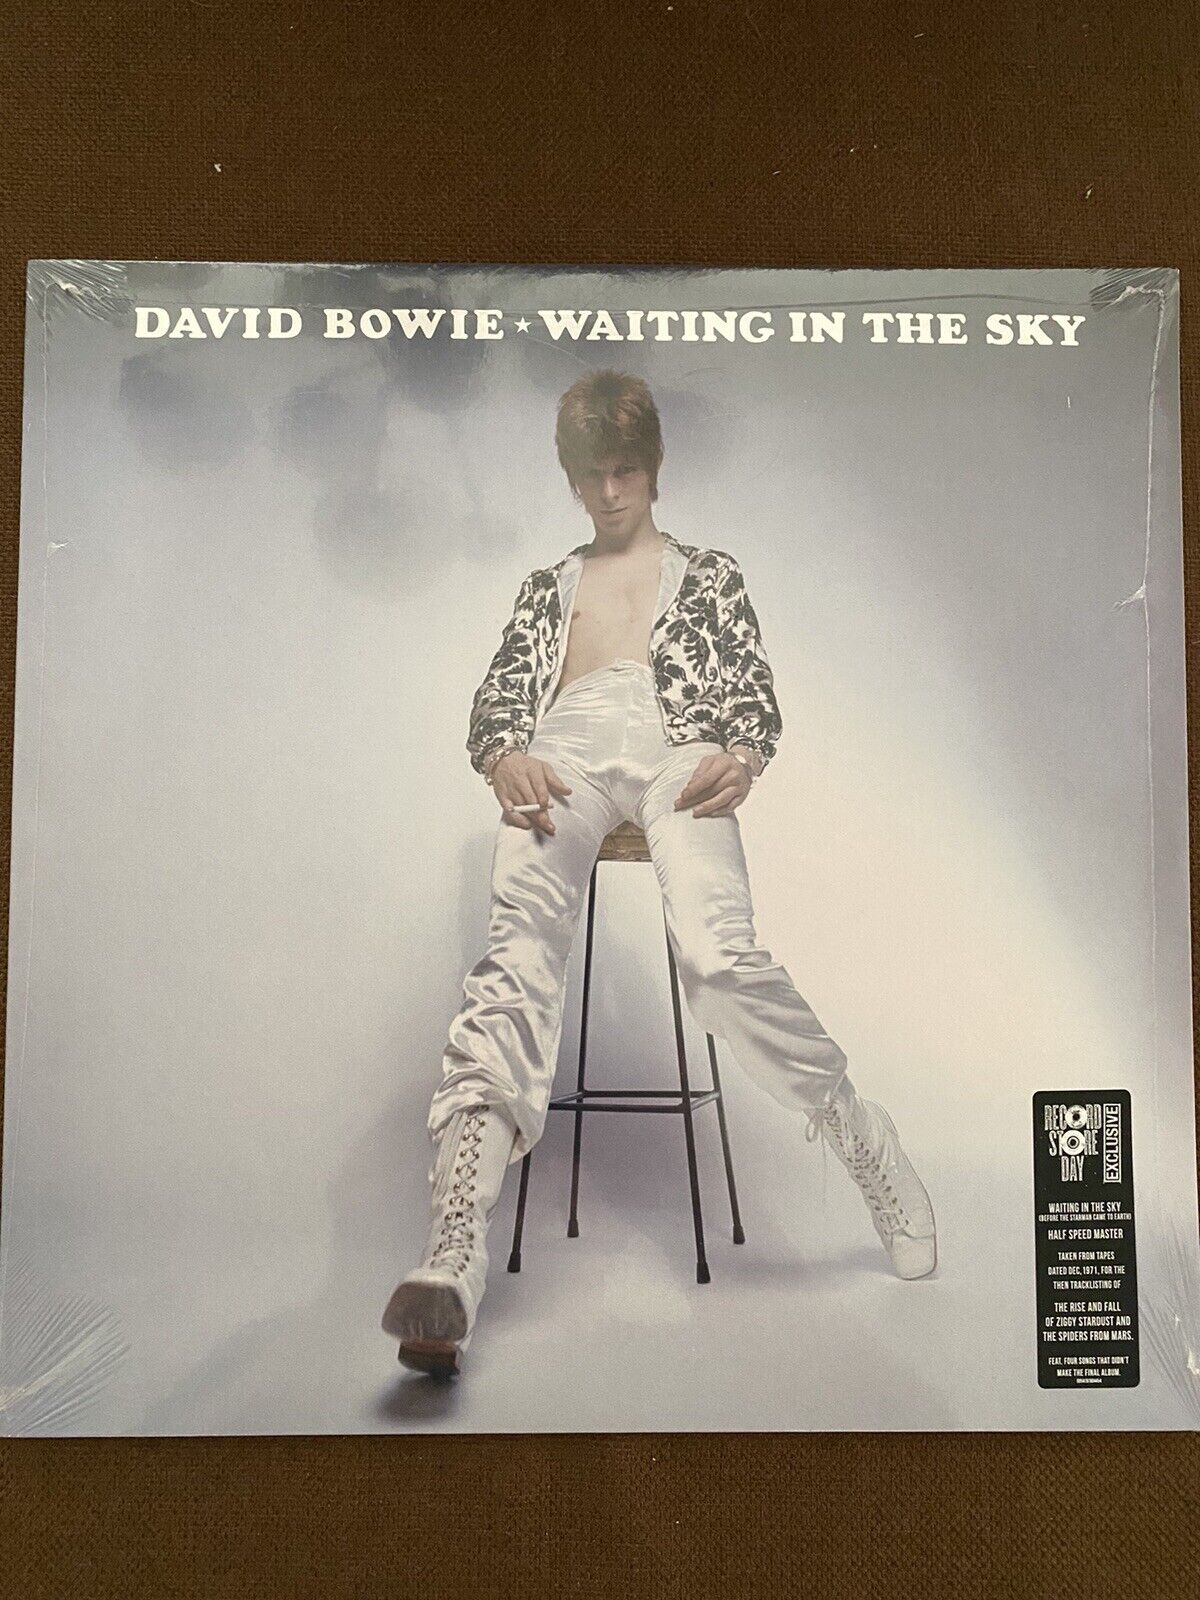 David Bowie  Waiting in the Sky RSD RECORD STORE DAY  Limited Edition New/Sealed